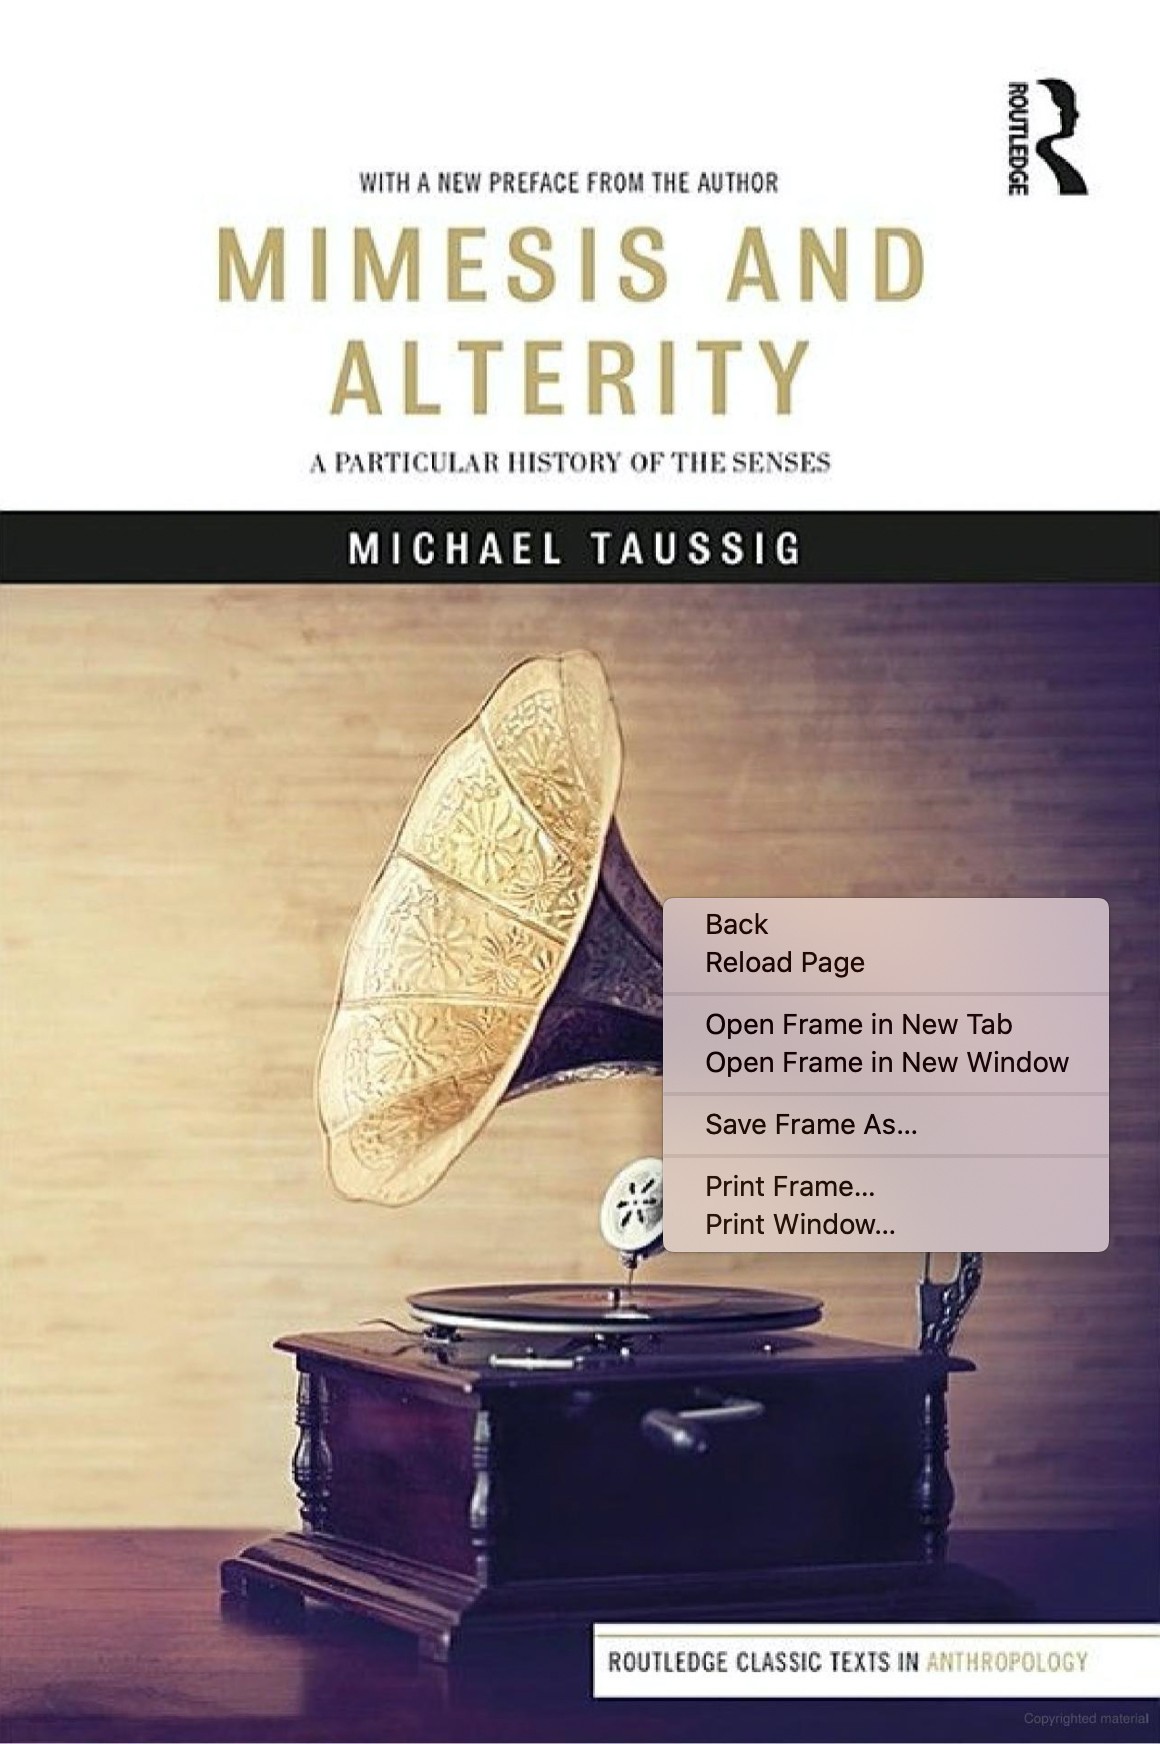 Book cover: Michael Taussig, Mimesis and Alterity: A Particular History of the Senses